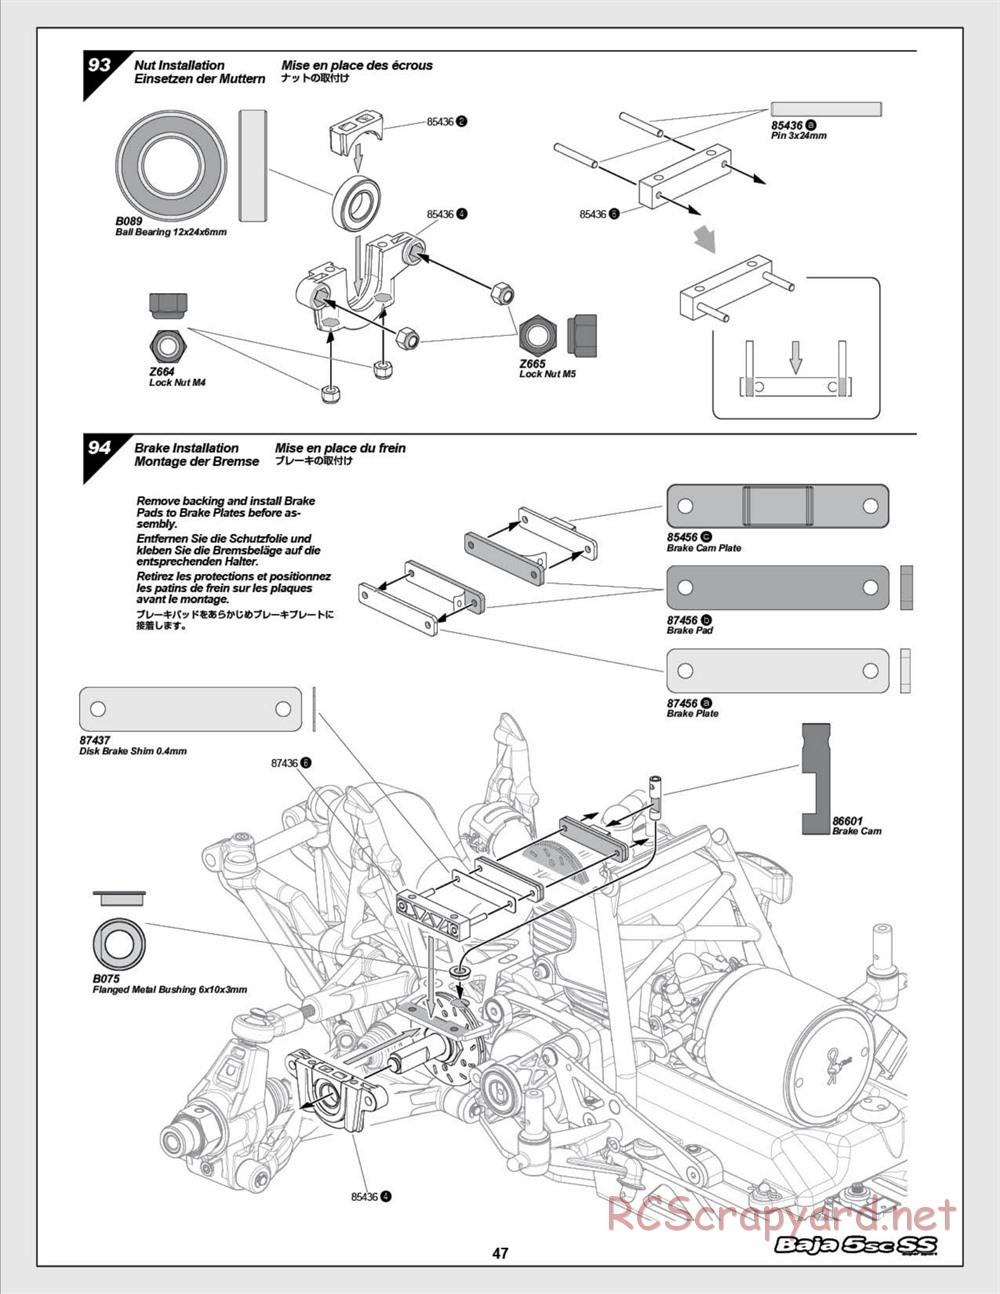 HPI - Baja 5SC SS - Exploded View - Page 47